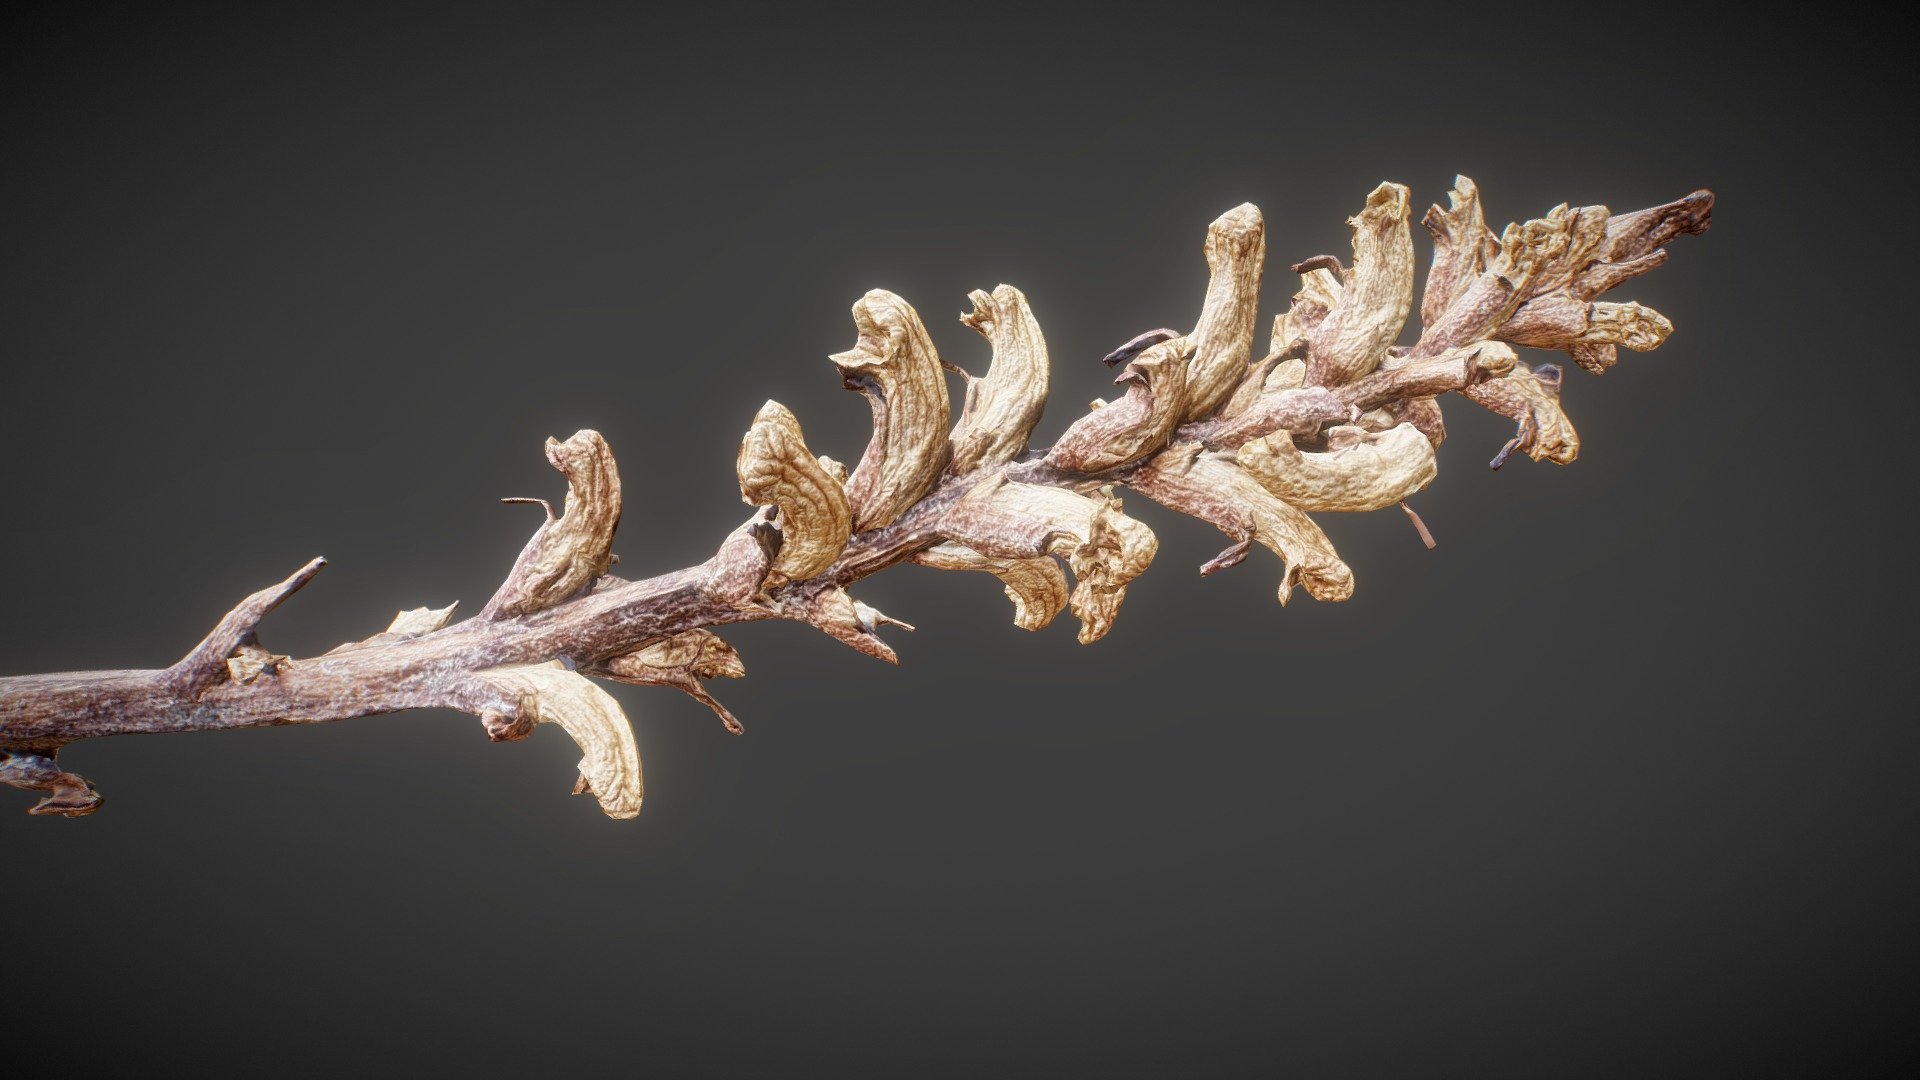 This model is perfect for 3D printing and film making, you can use it for game but it need a bit of decimation to be applied as scatter/particle distribution.



Aspect:

de-lighting applied

Dried texture

Scale, about 20 cm high 

Included 8K textures
 - Dried-plant 02 - Buy Royalty Free 3D model by optimuscan 3d model